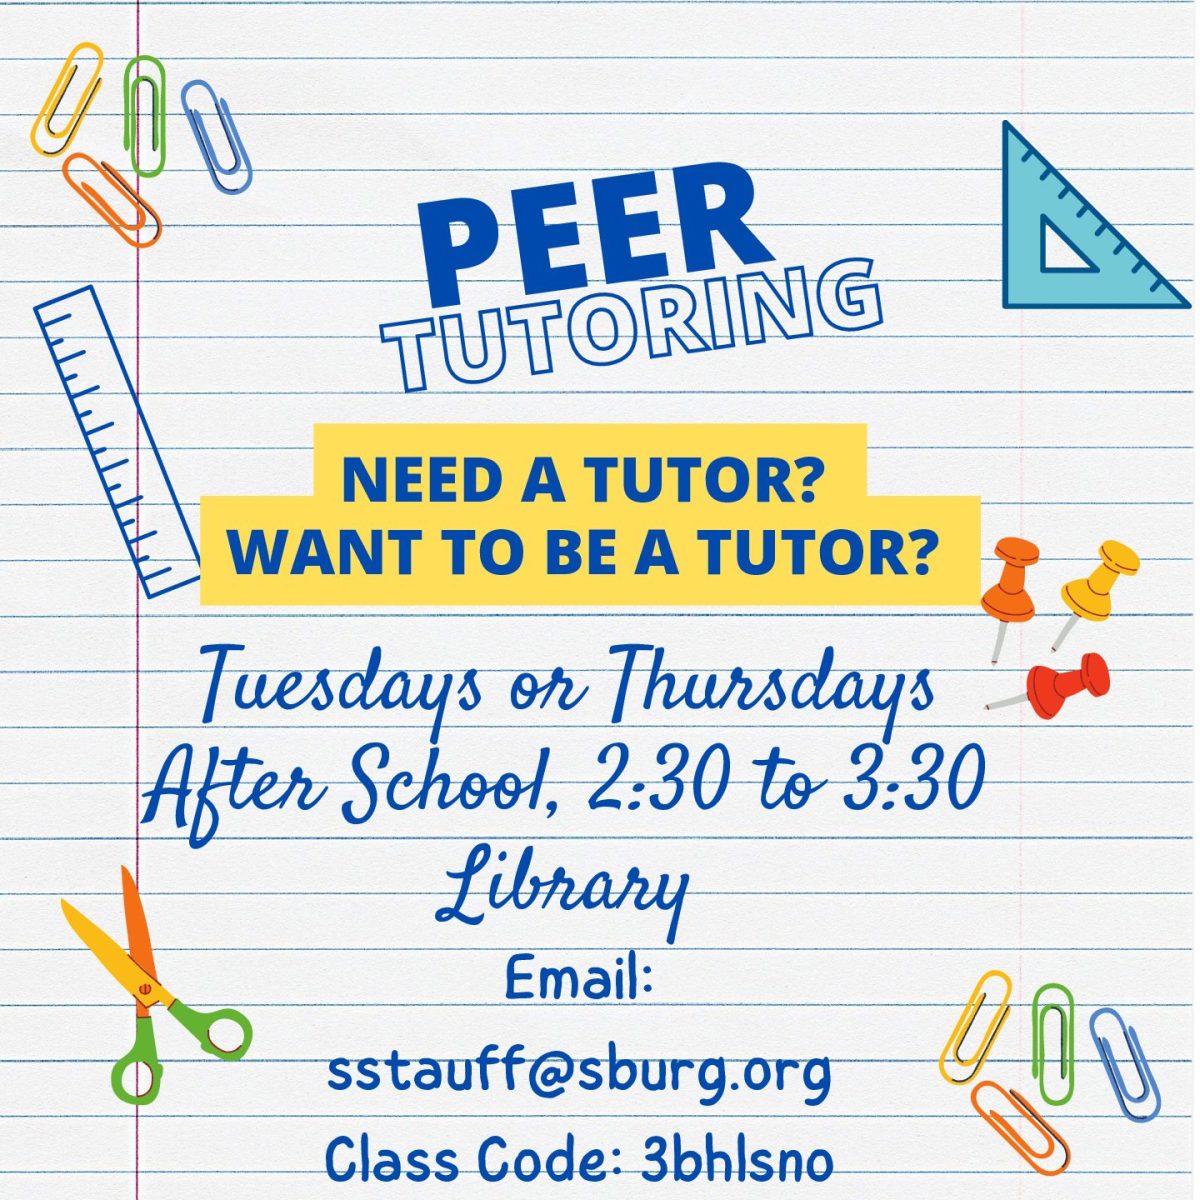 Sign+up+for+peer+tutoring+today+for+help+in+any+subject+you+may+be+struggling+in%21